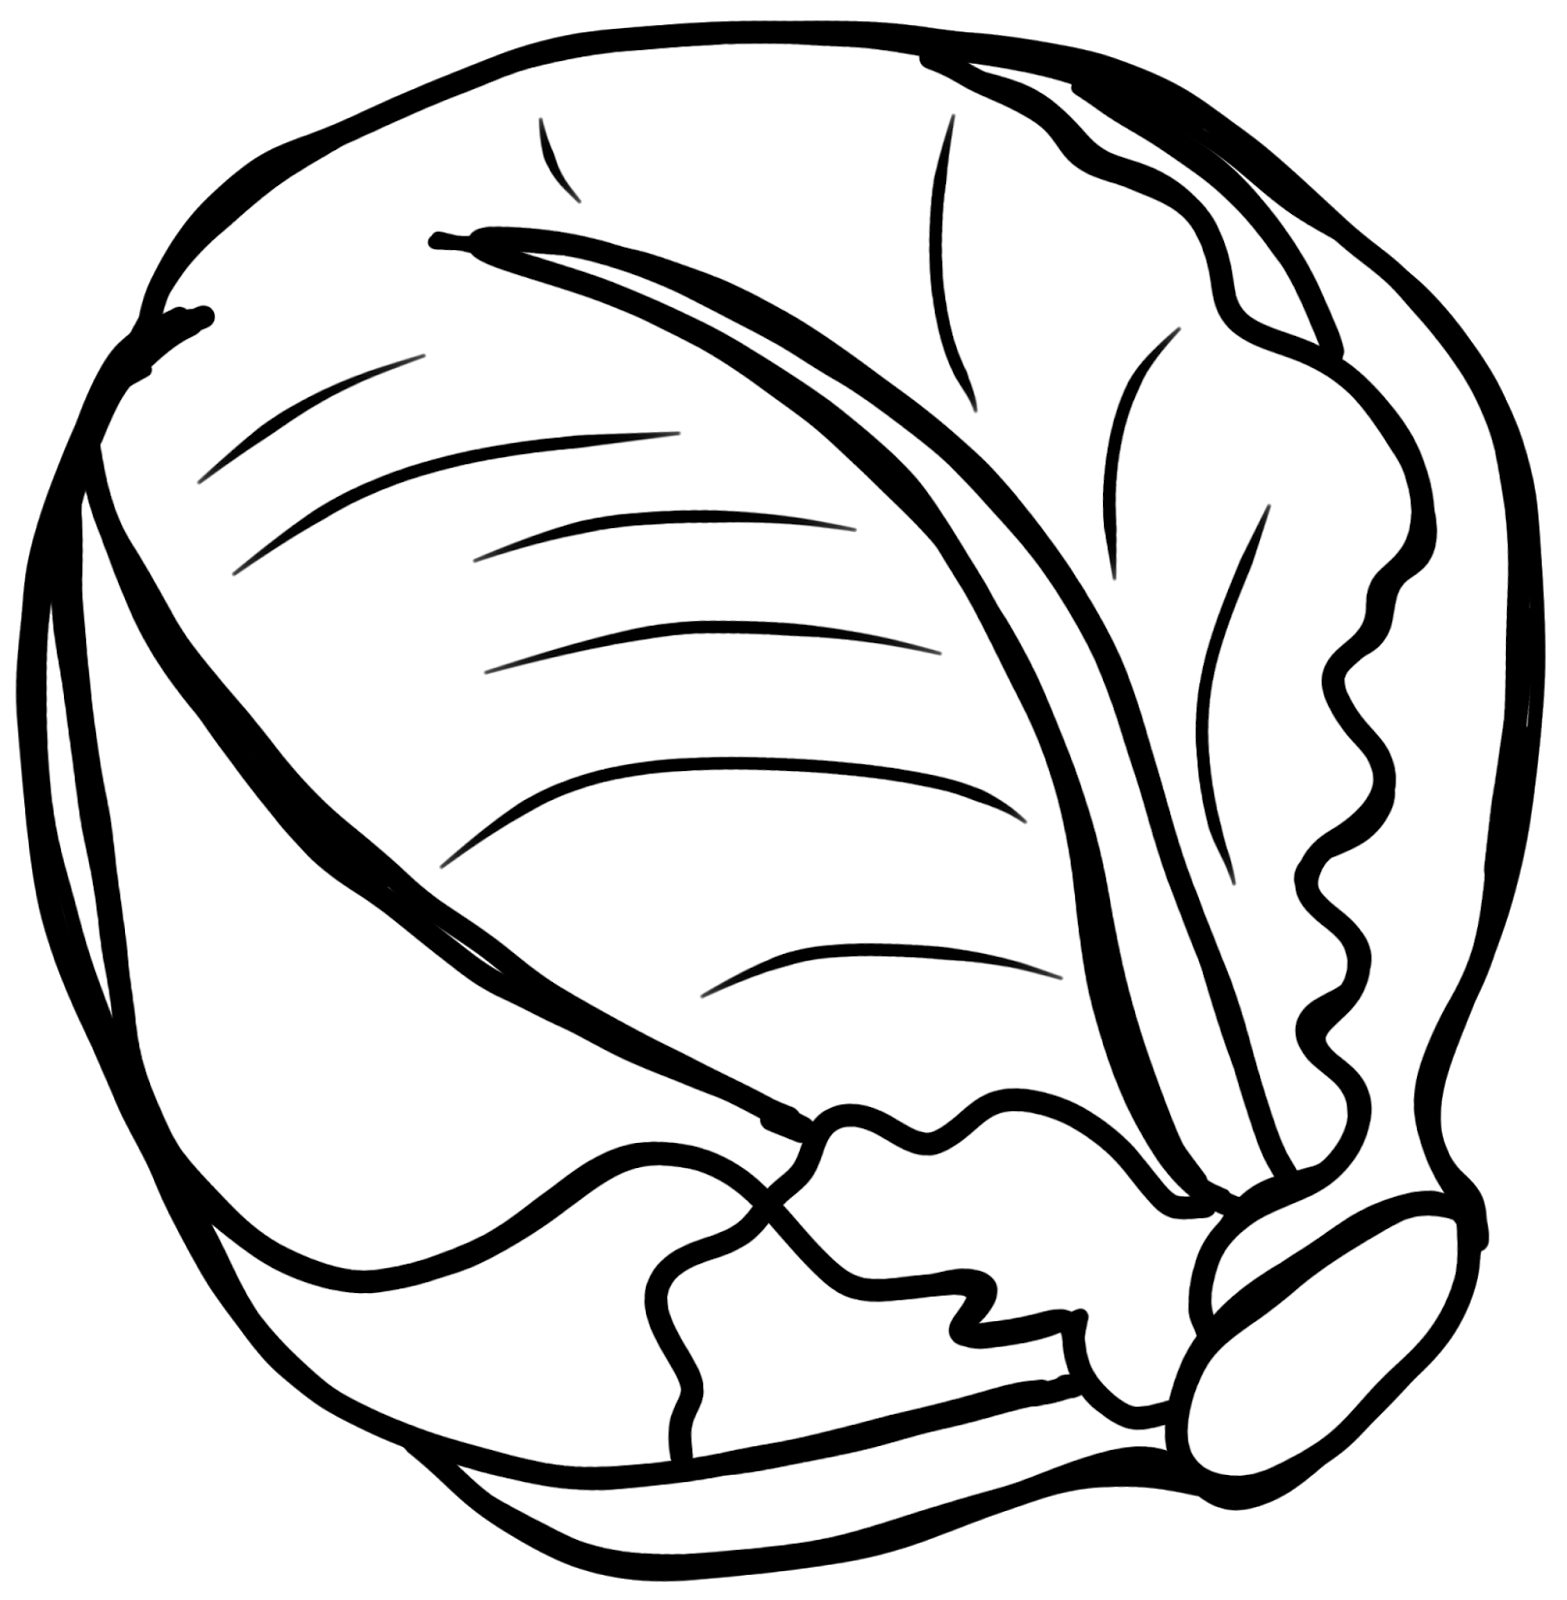 Lettuce clipart outline. Cabbage black and white